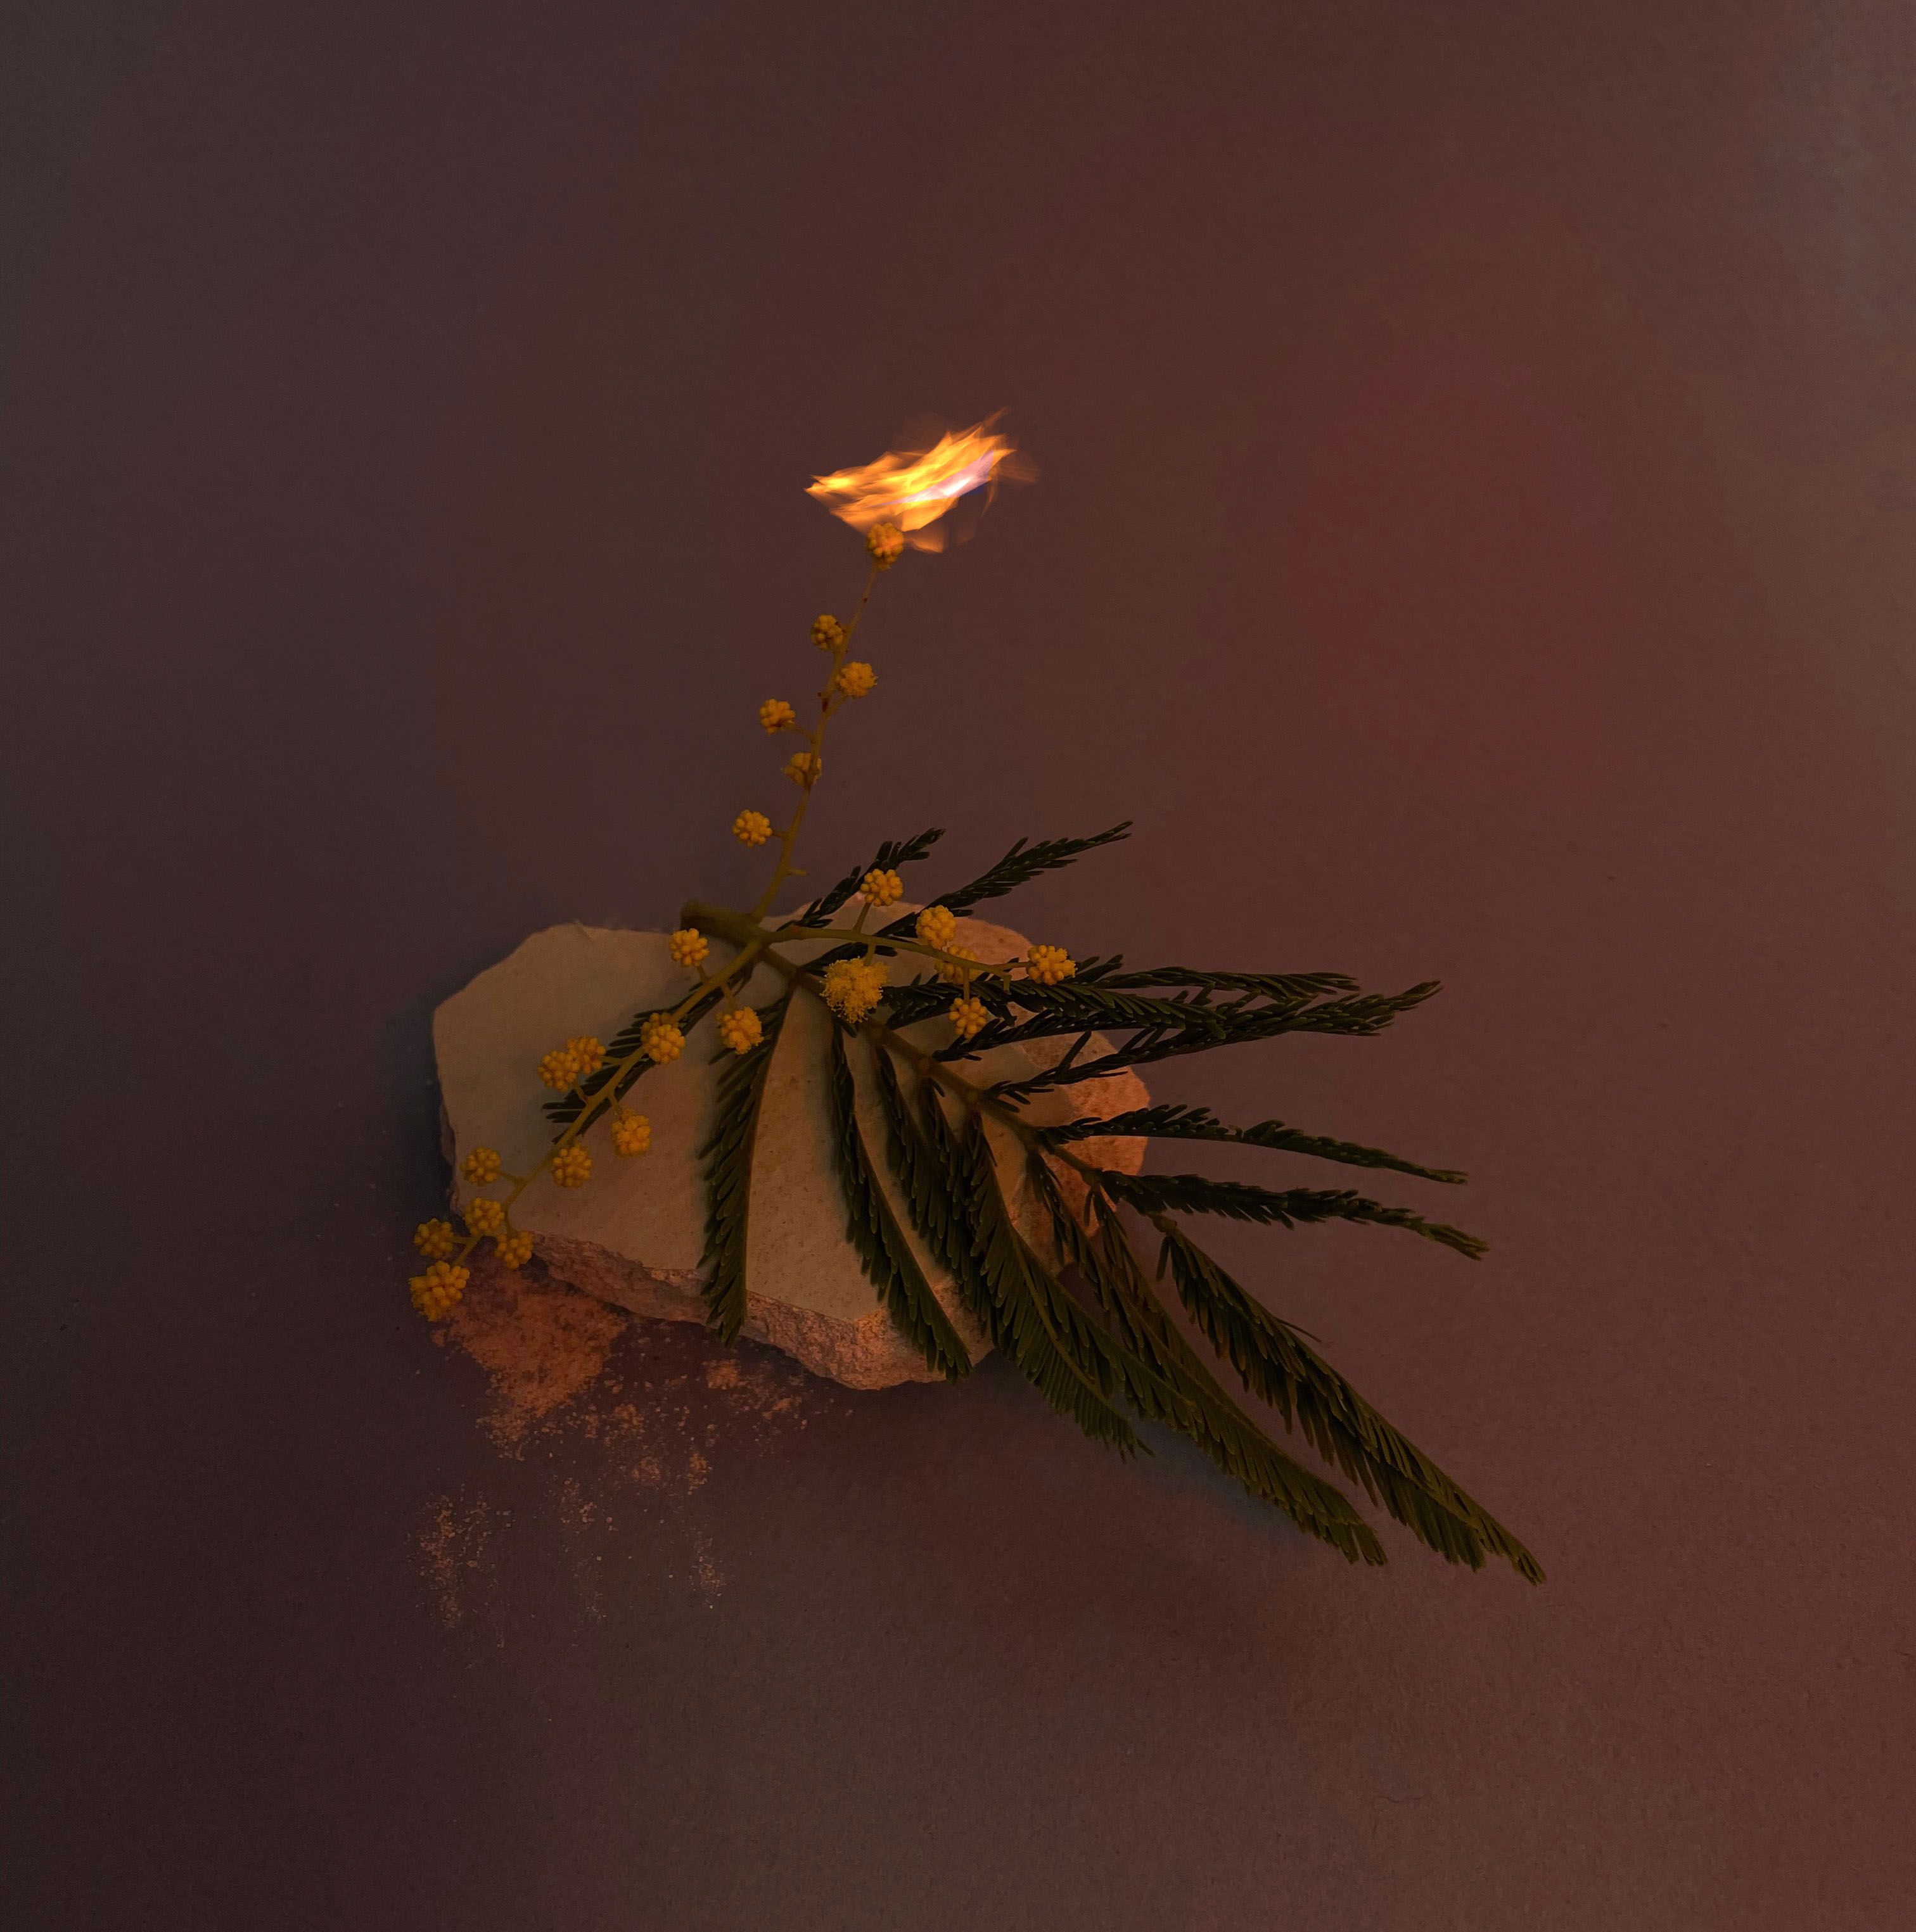 Burning mimosa flower draped on a tile